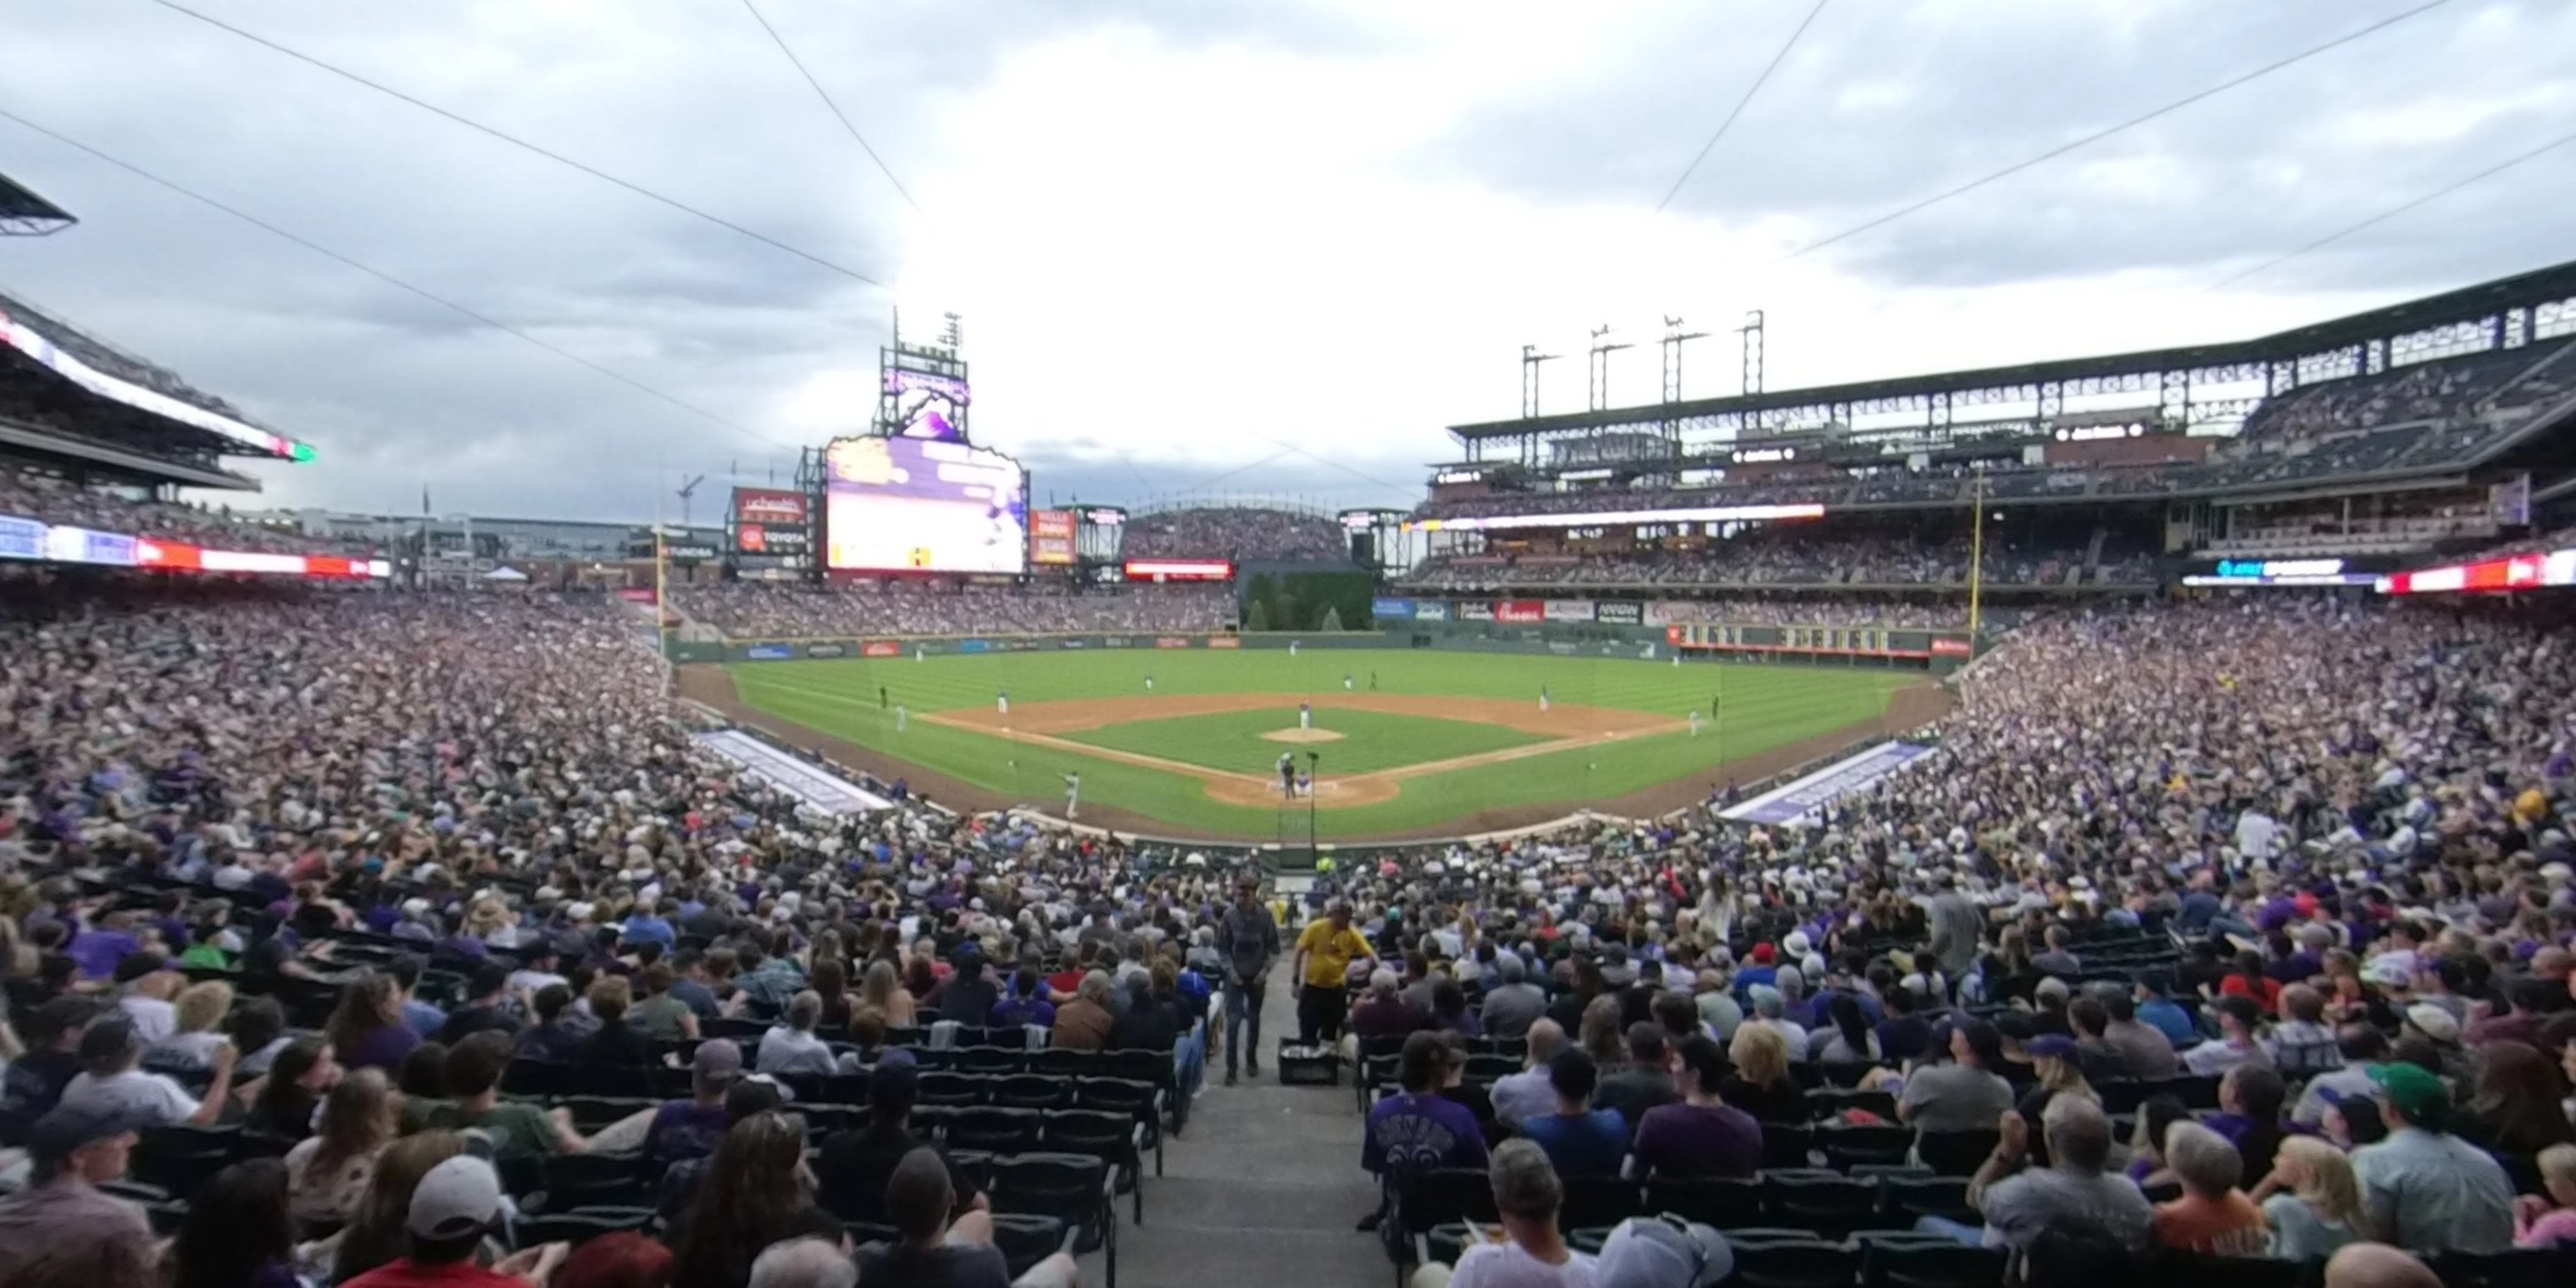 section 130 panoramic seat view  - coors field